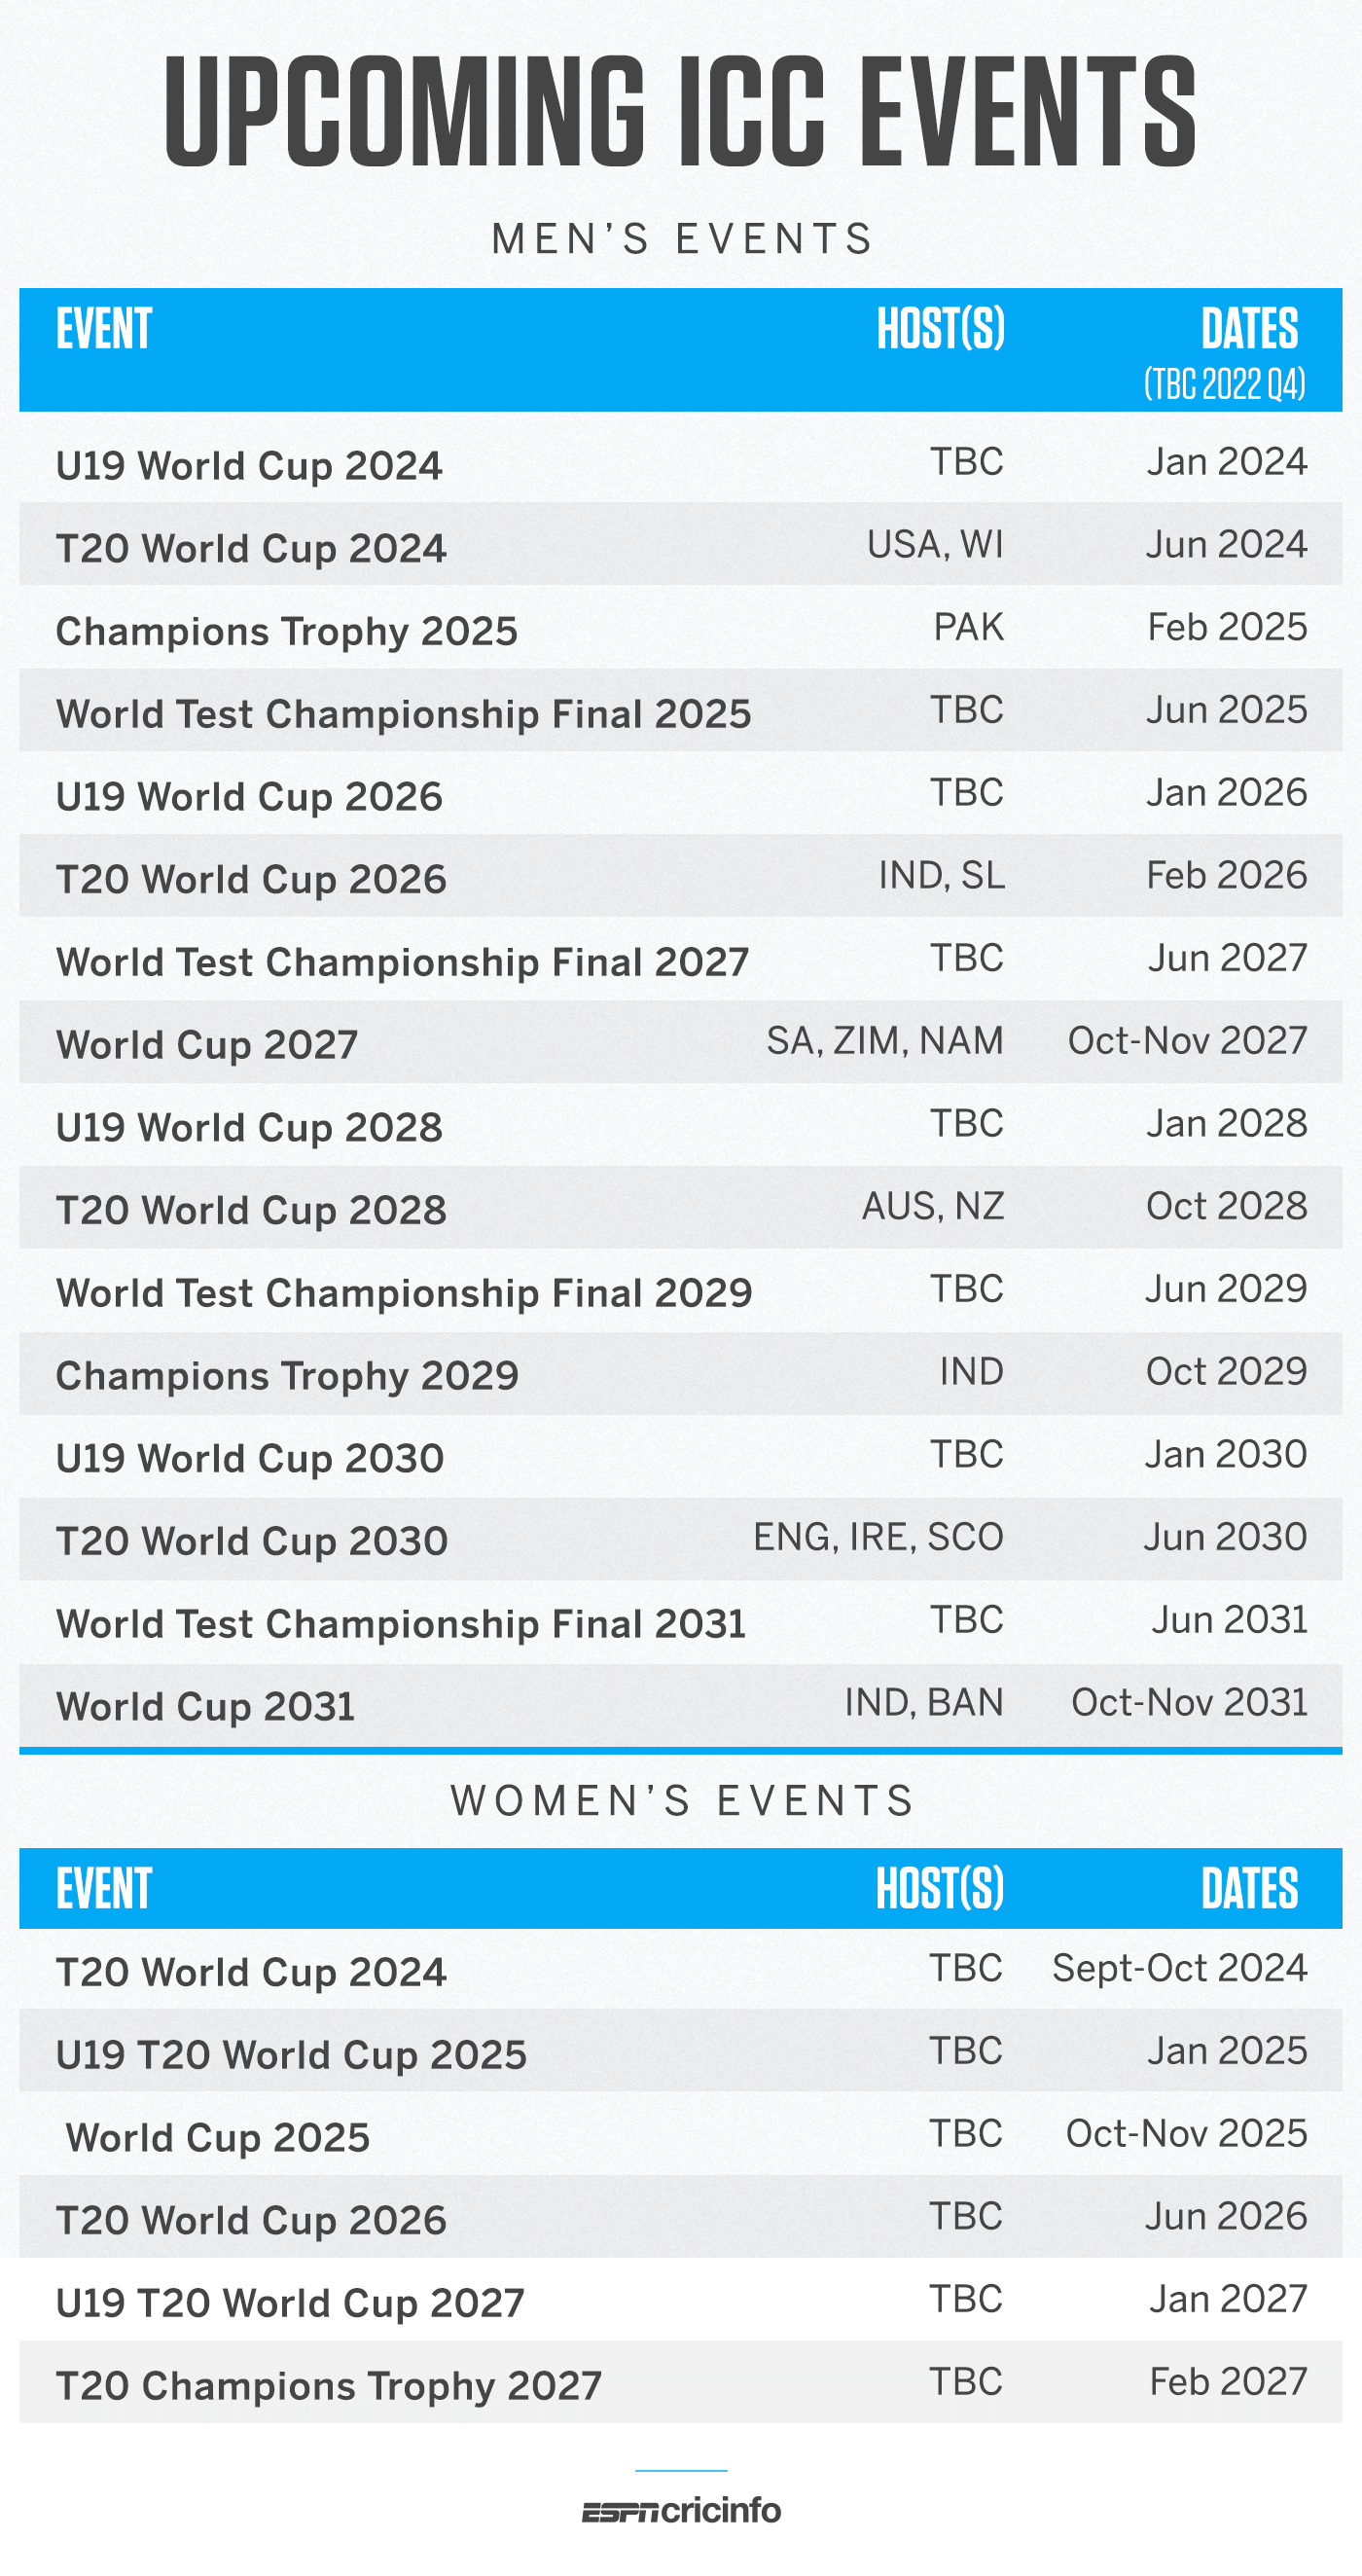 The ICC events in the 20242031 cycle